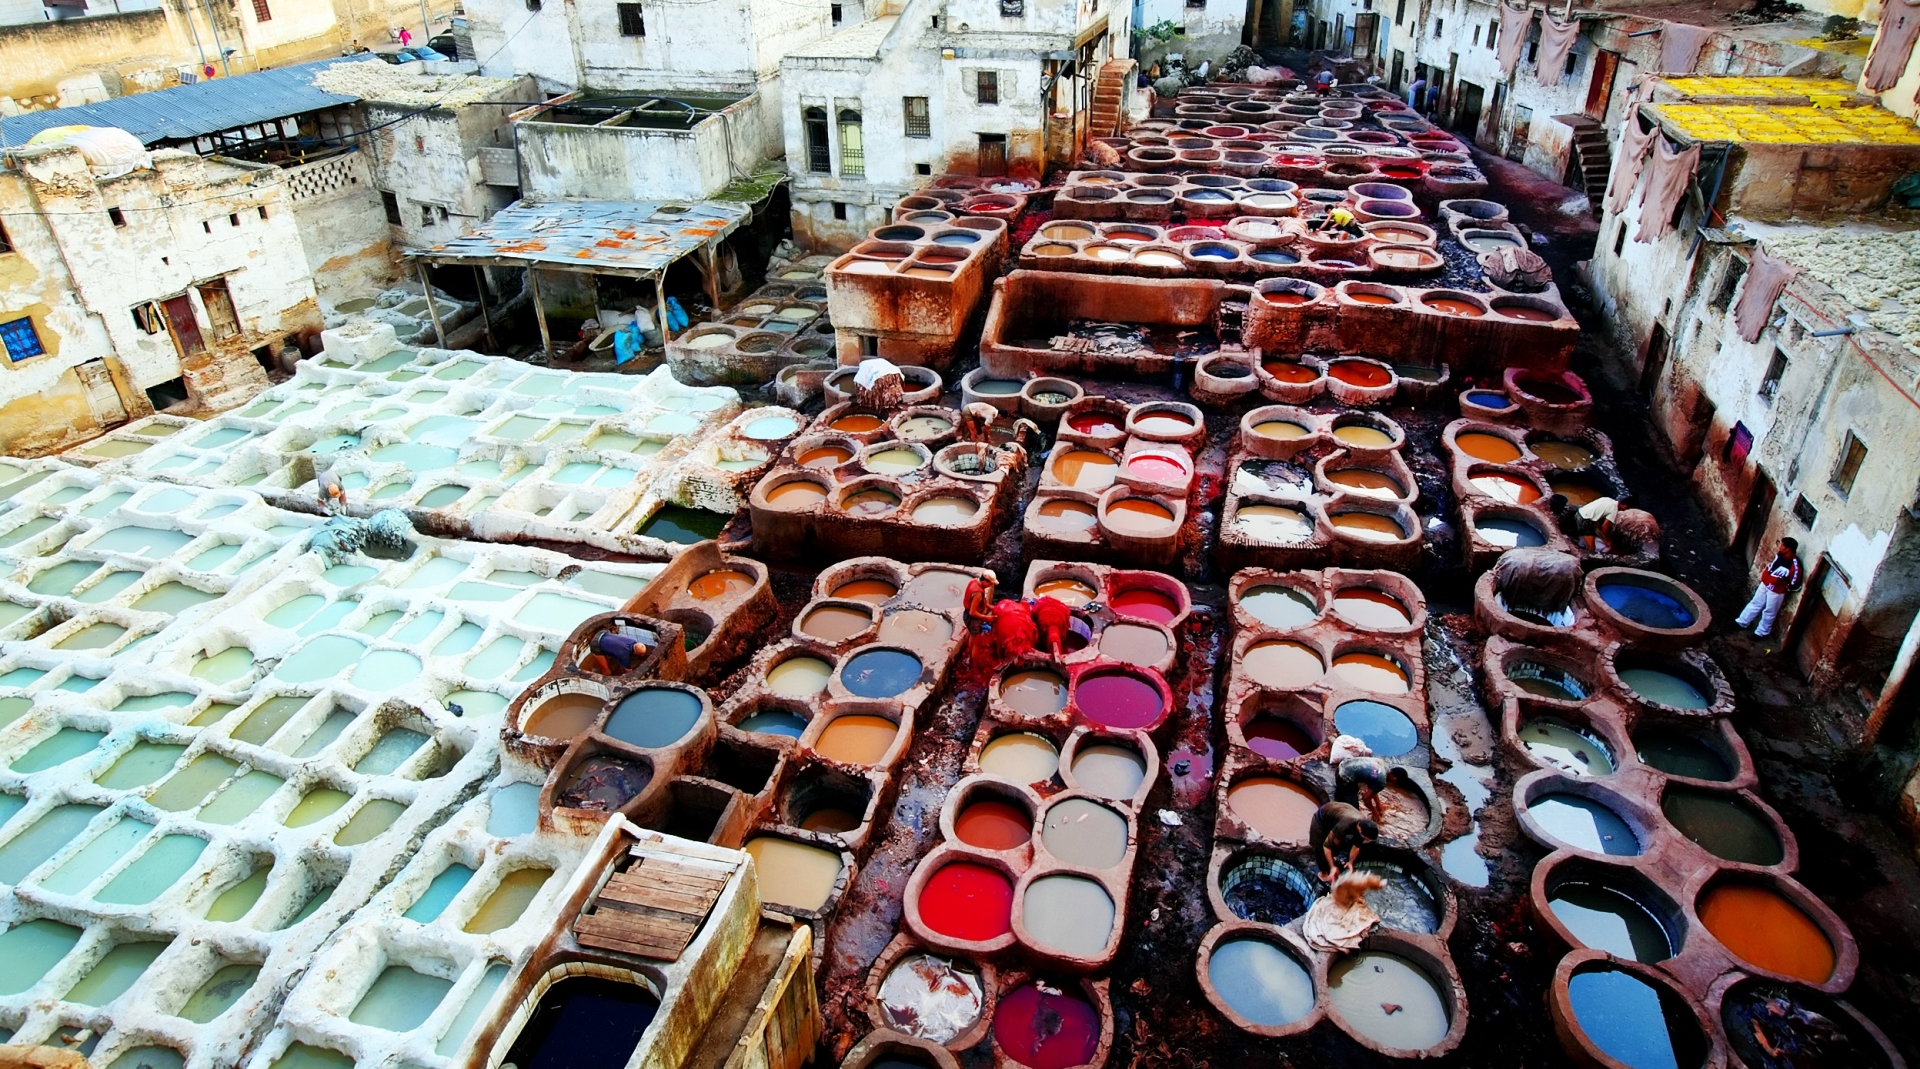 Fes tanneries - Authentic Morocco